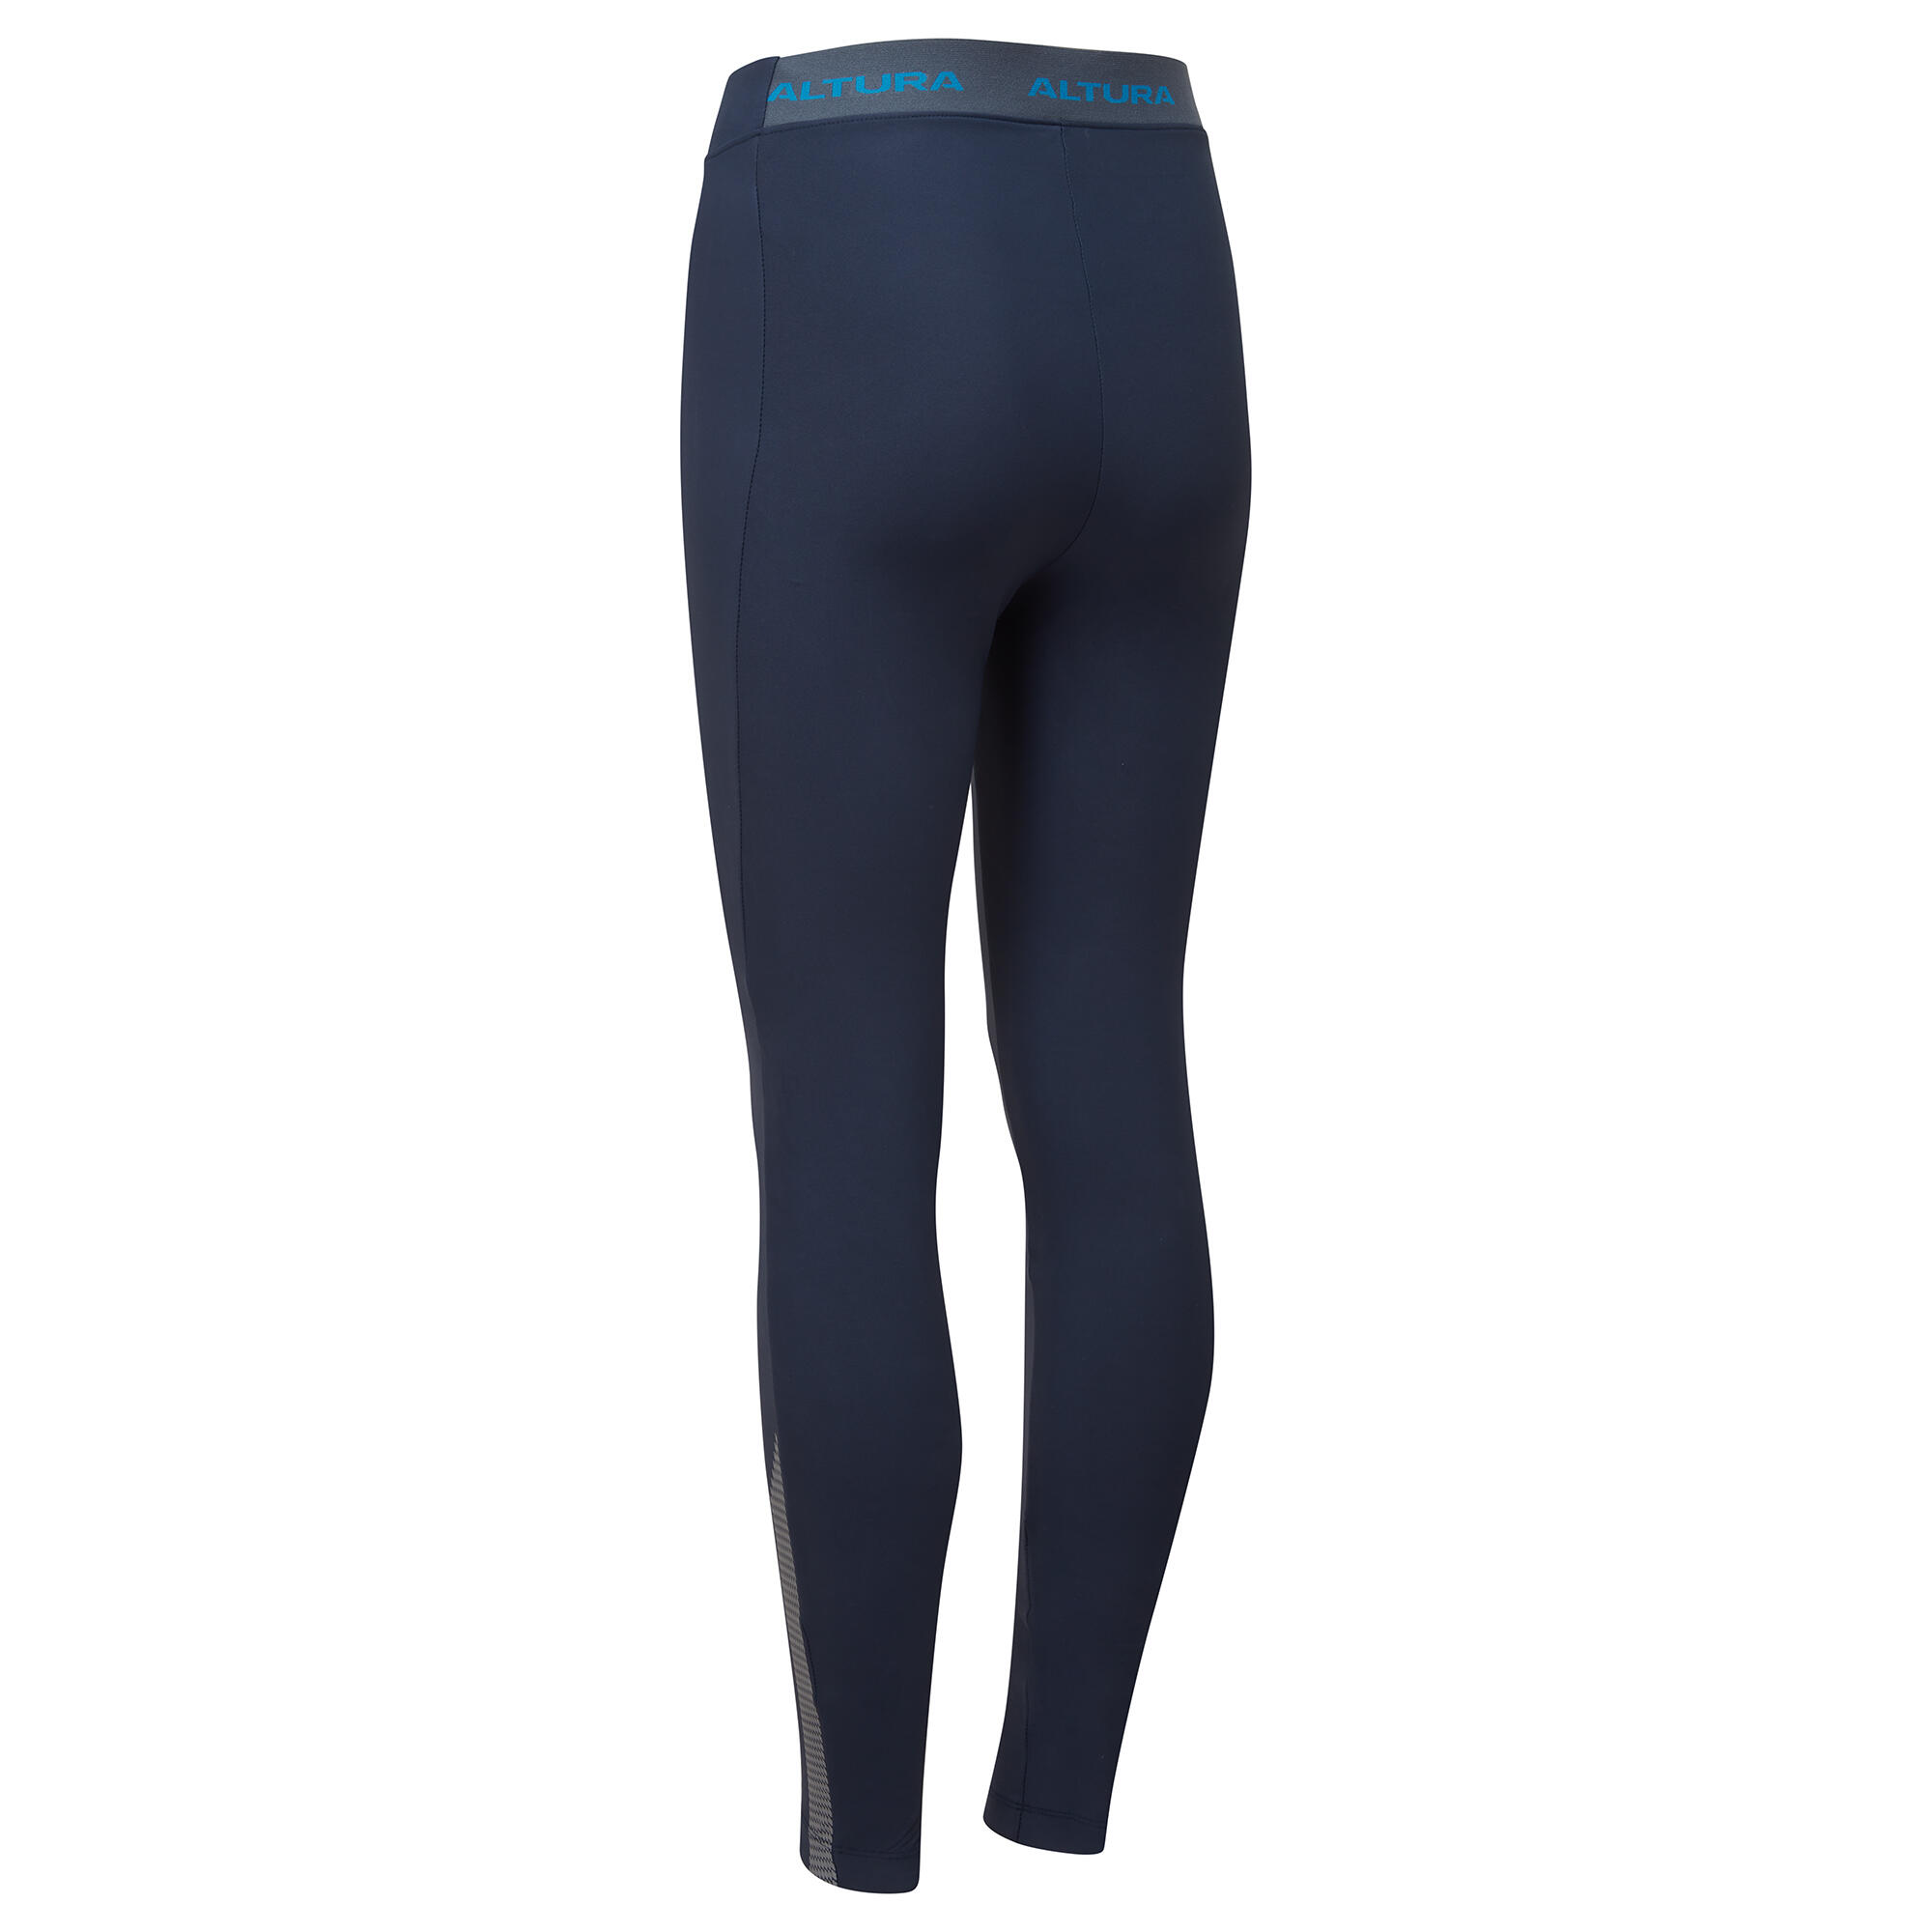 Grid Women's Cruiser Water Resistant Tights 4/5